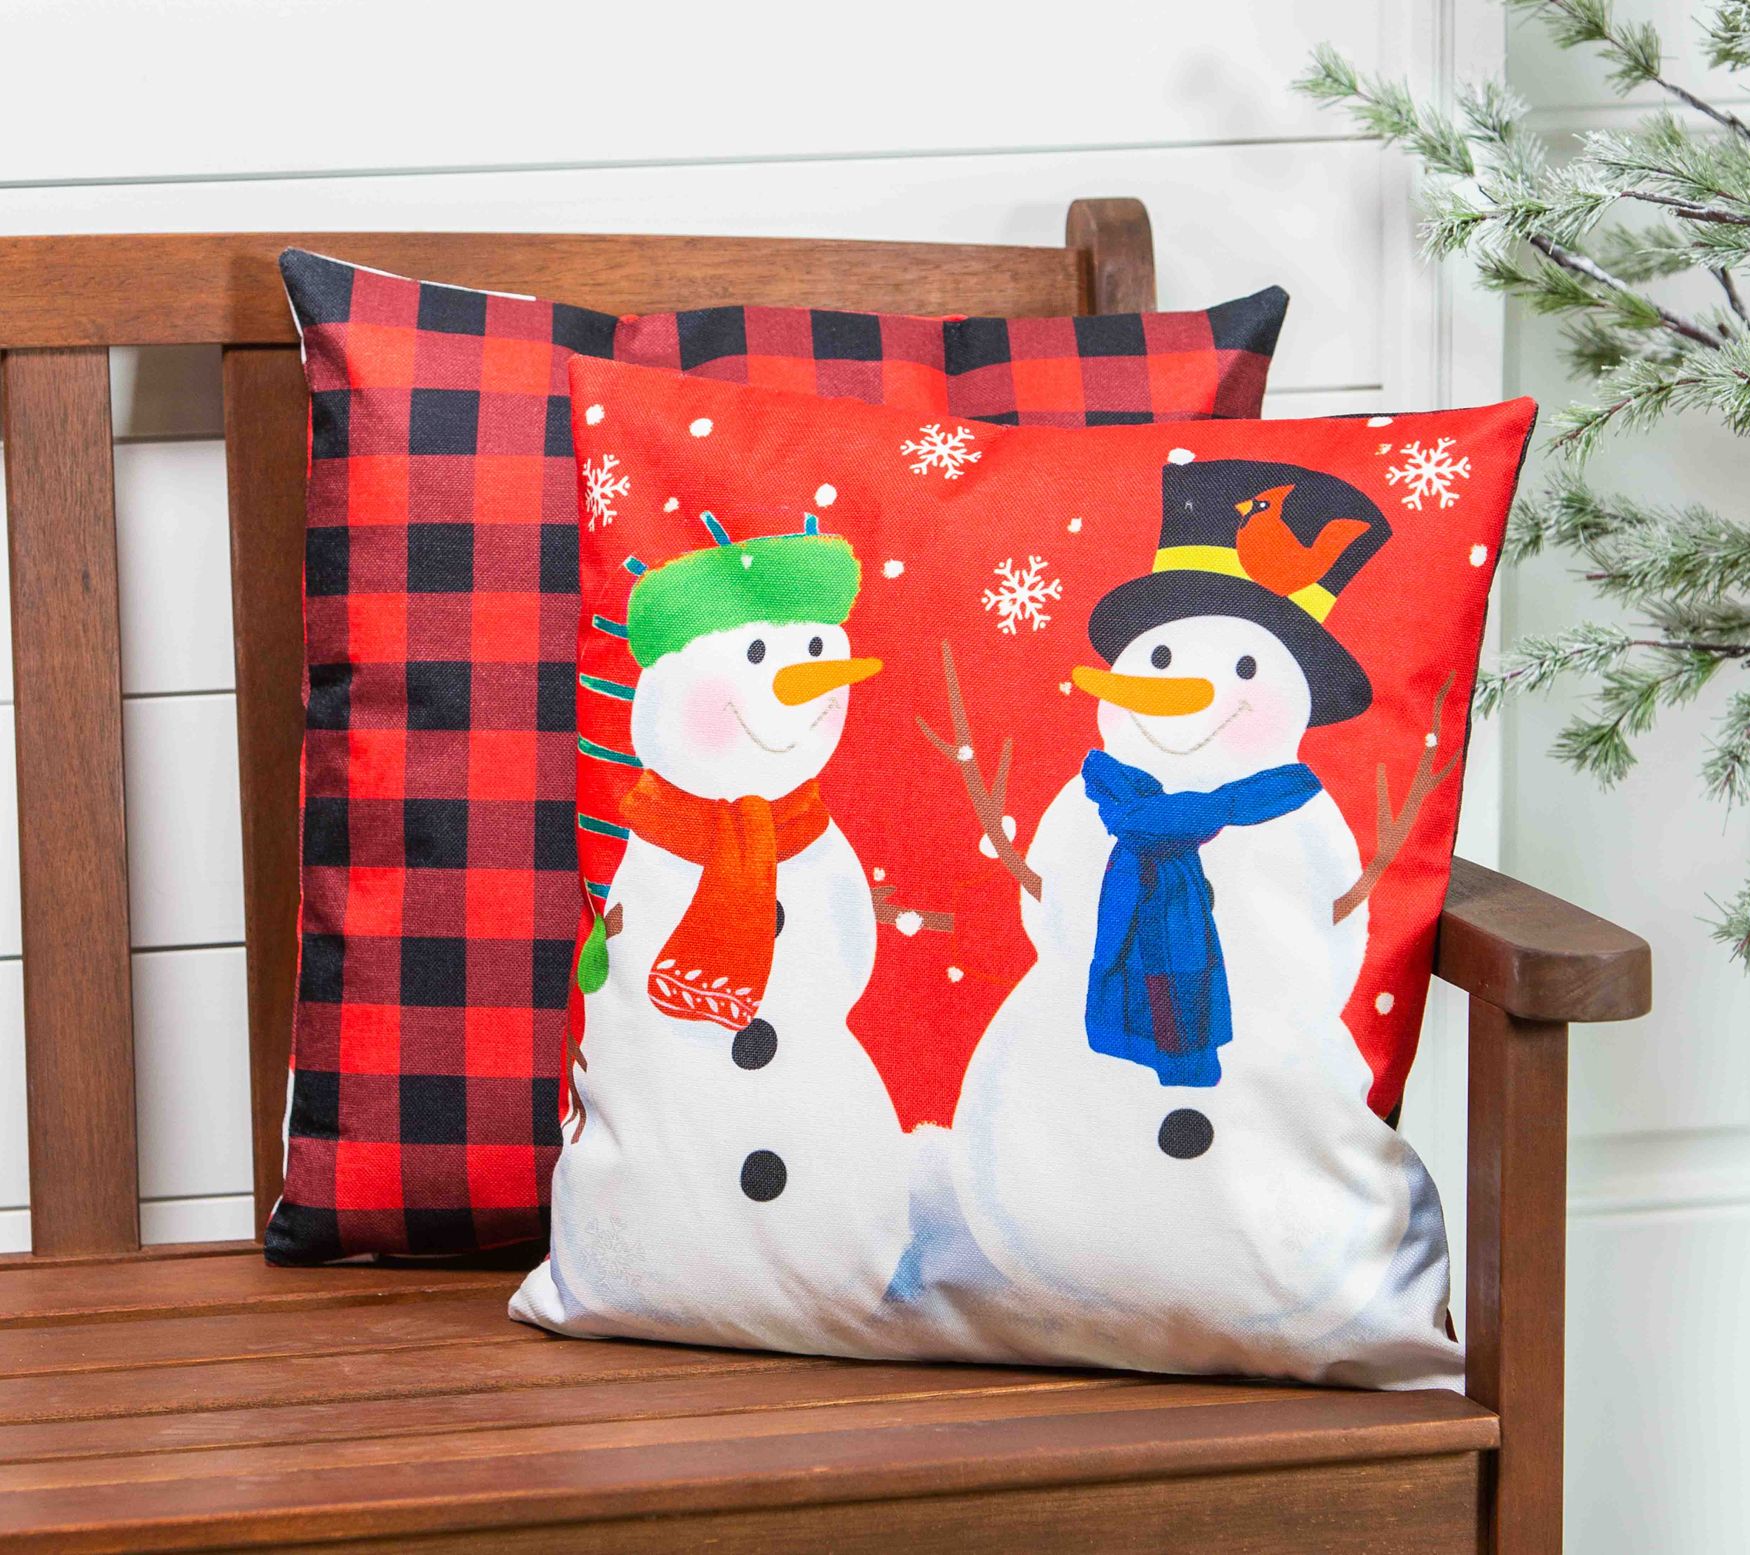 Evergreen Interchangeable Pillow Cover Set of 4, Happy Holidays